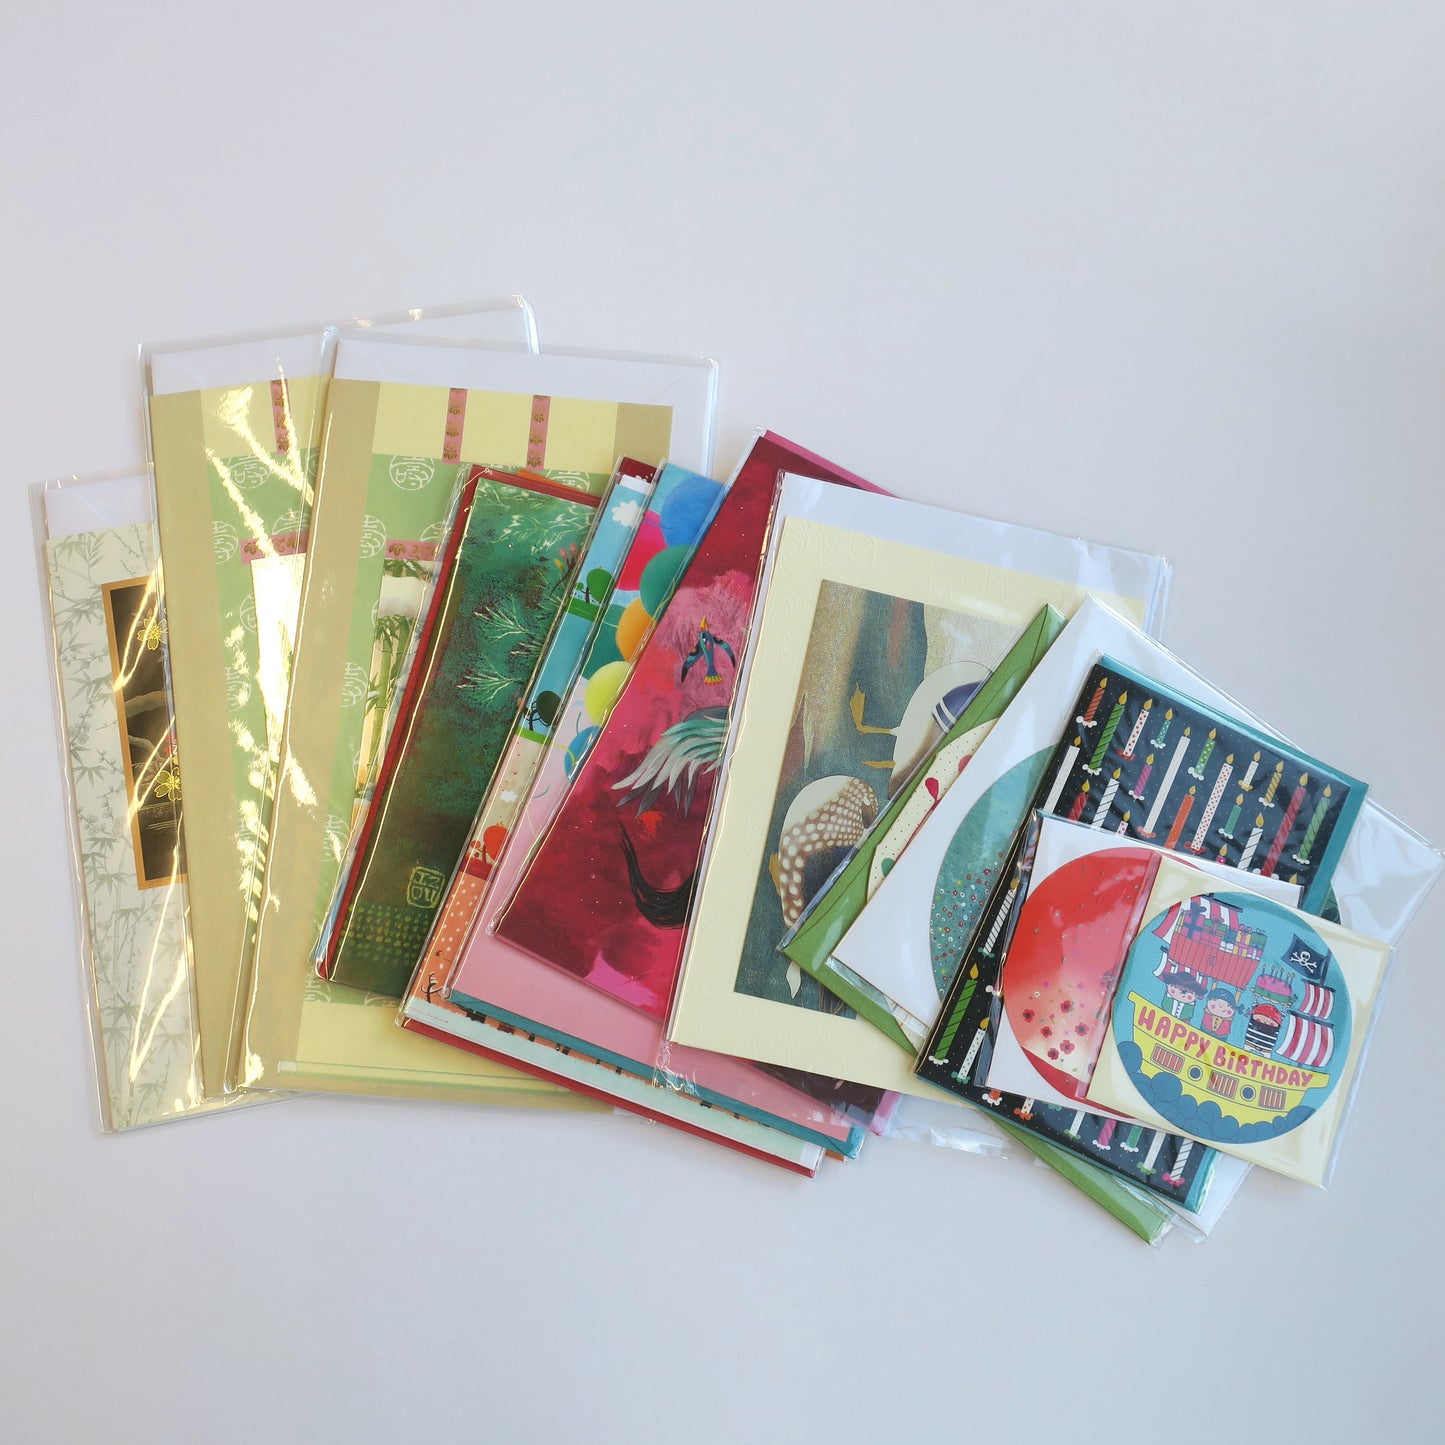 Greeting cards bundle, Japanese cards, French cards